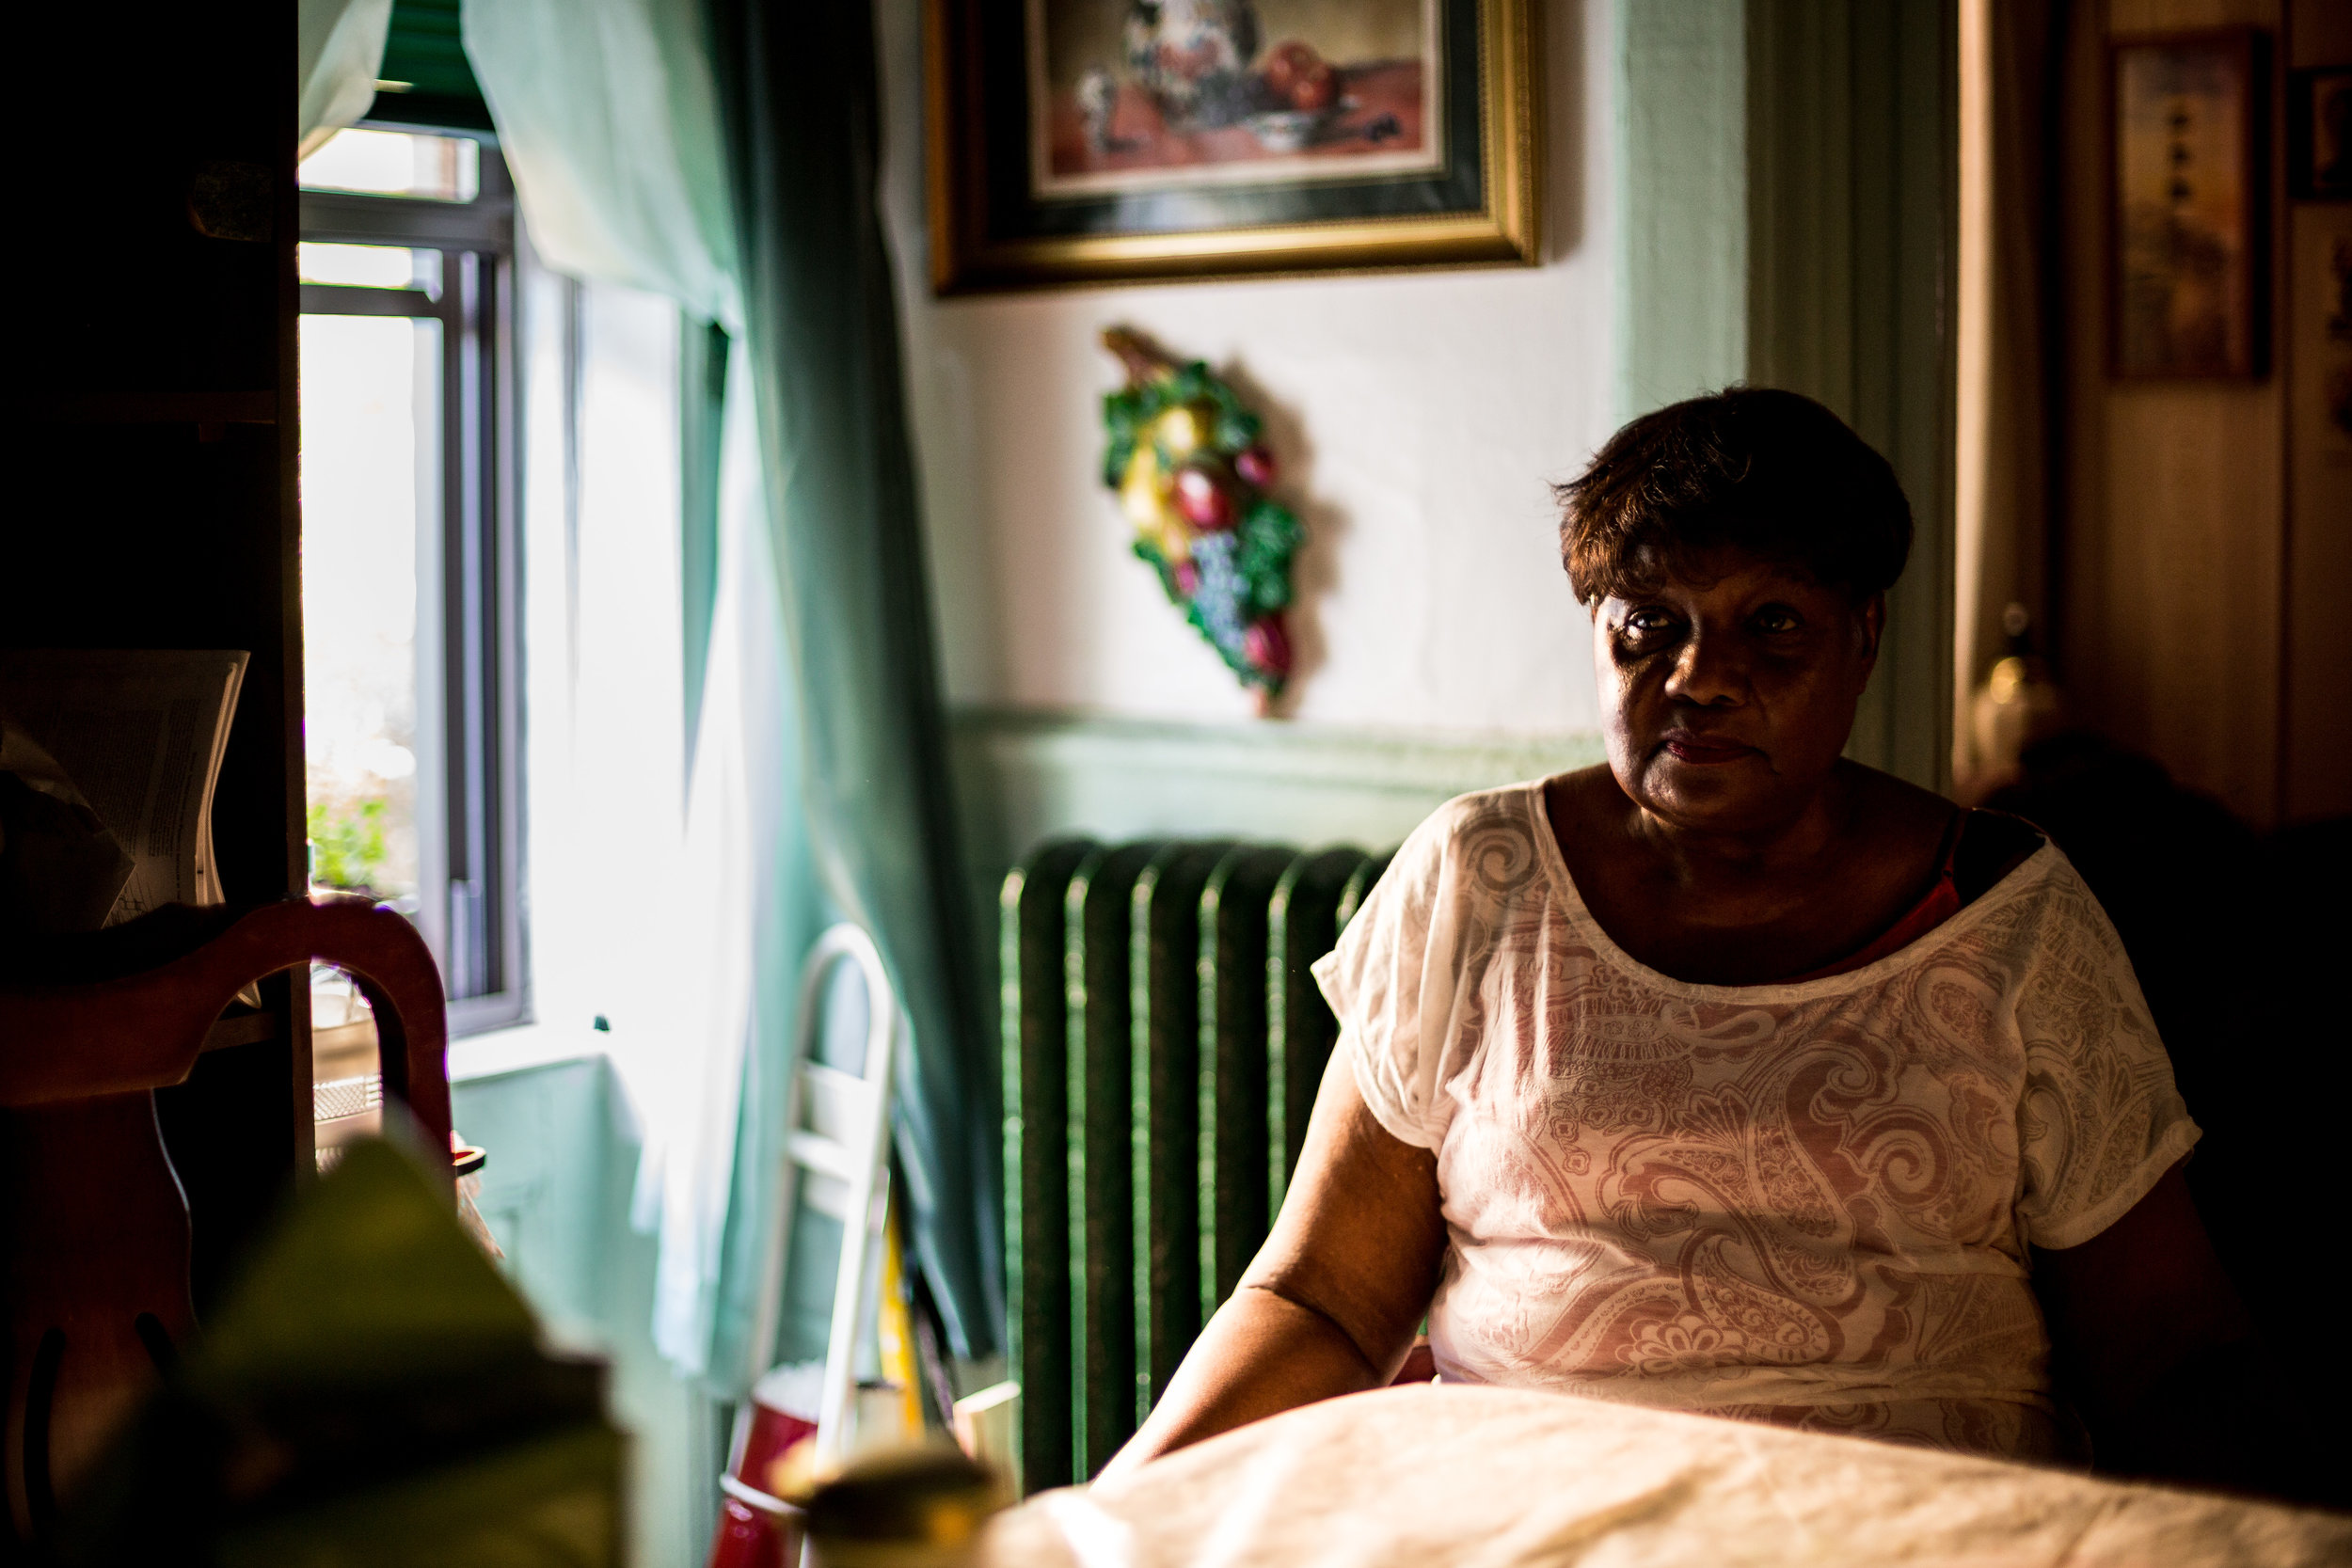  76-year-old Bessie Staton in her Crown Heights home, where she and fellow tenants formed a union and engaged in a rent strike against negligent landlords. Summer, 2016 